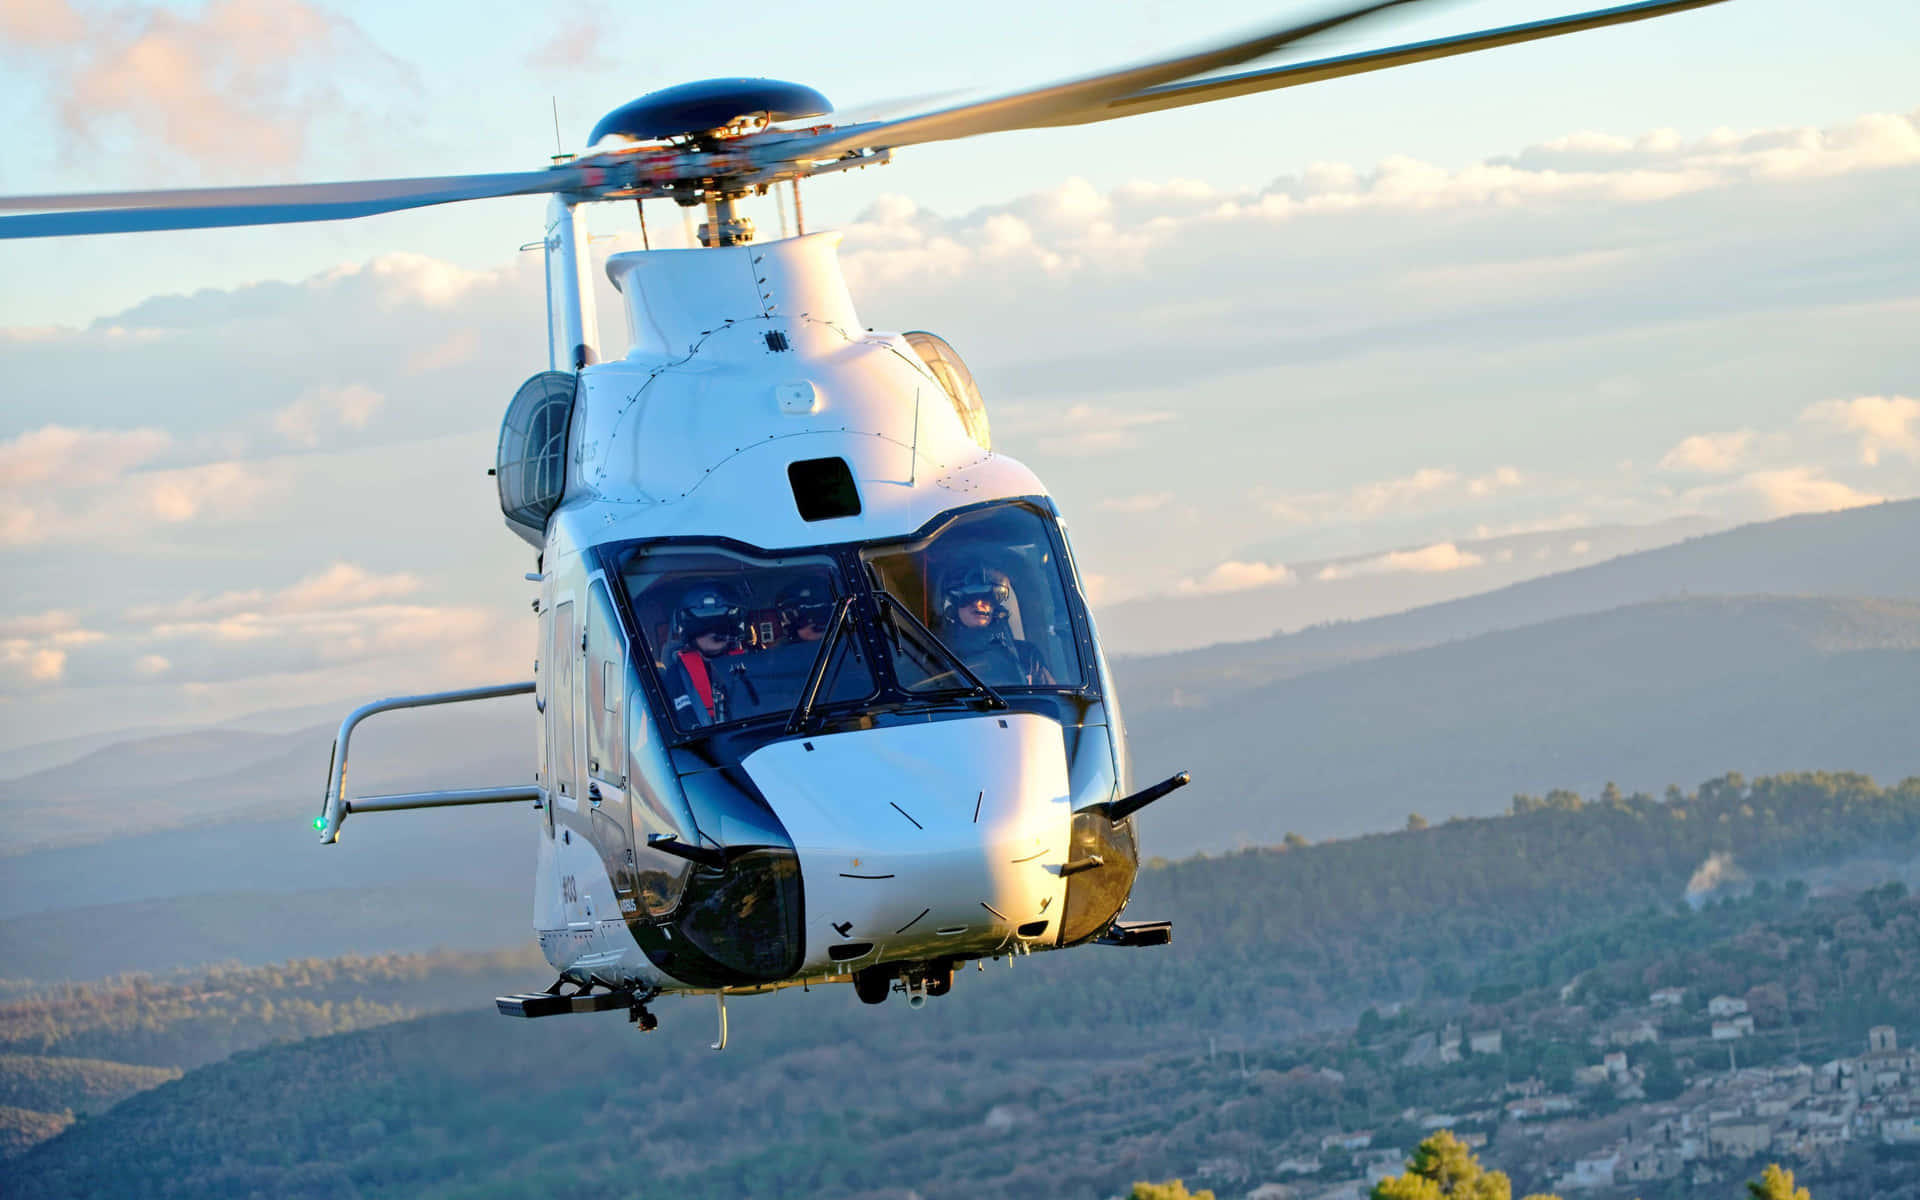 Enjoy a view of the skies in a 4K Helicopters